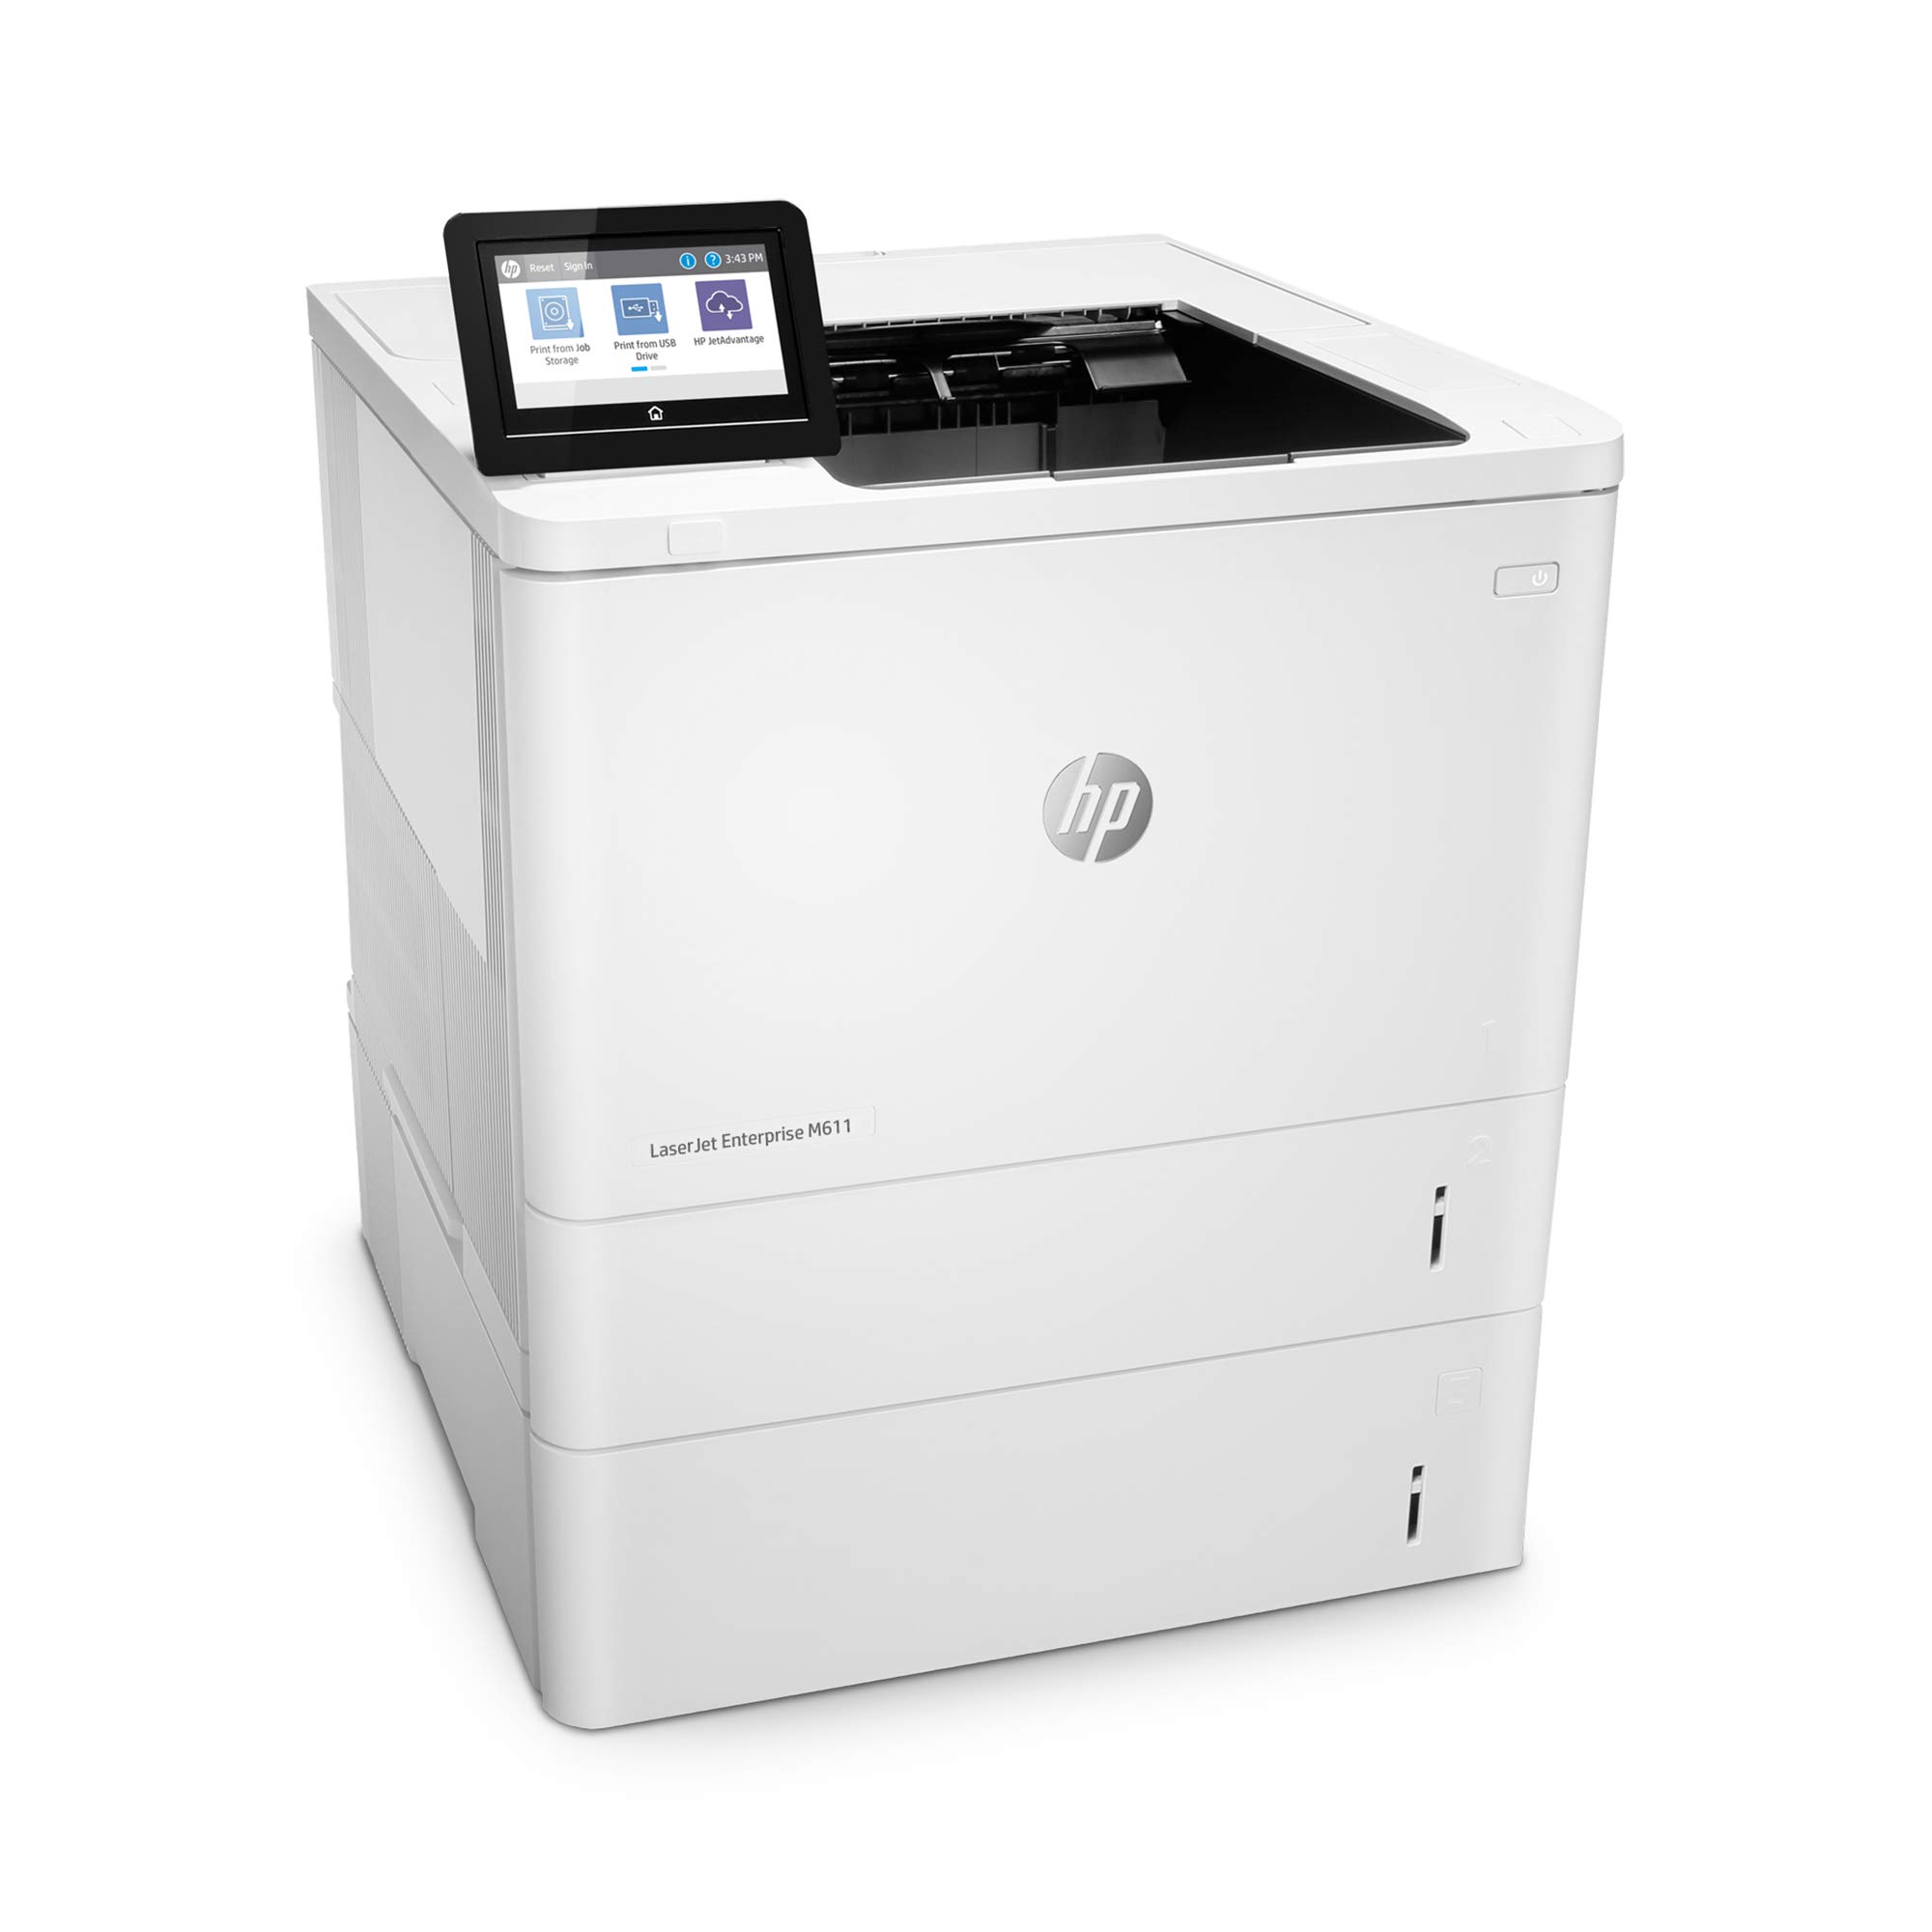 HP LaserJet Enterprise M611x Black and White Printer with built-in Ethernet, 2-sided printing & extra paper tray (7PS85A) White